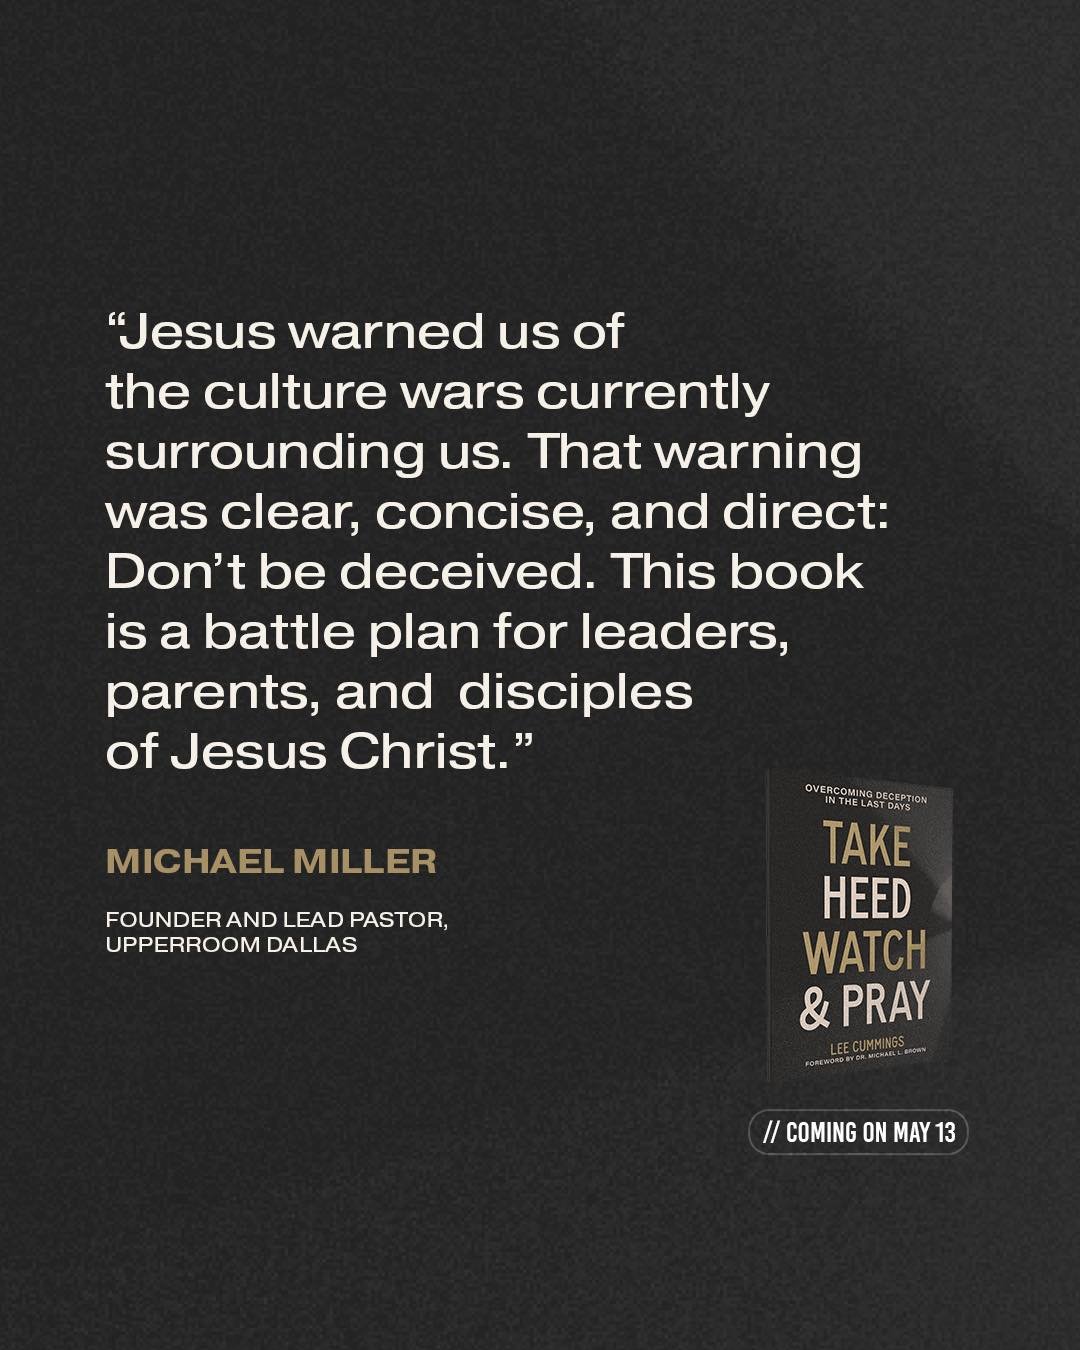 As you dive into Take Heed, Watch &amp; Pray, my prayer is for you to uncover the enemy&rsquo;s tactics, stay vigilant, and for you, your family, and your church to stand firm until the end.

AVAILABLE EVERYWHERE MONDAY!